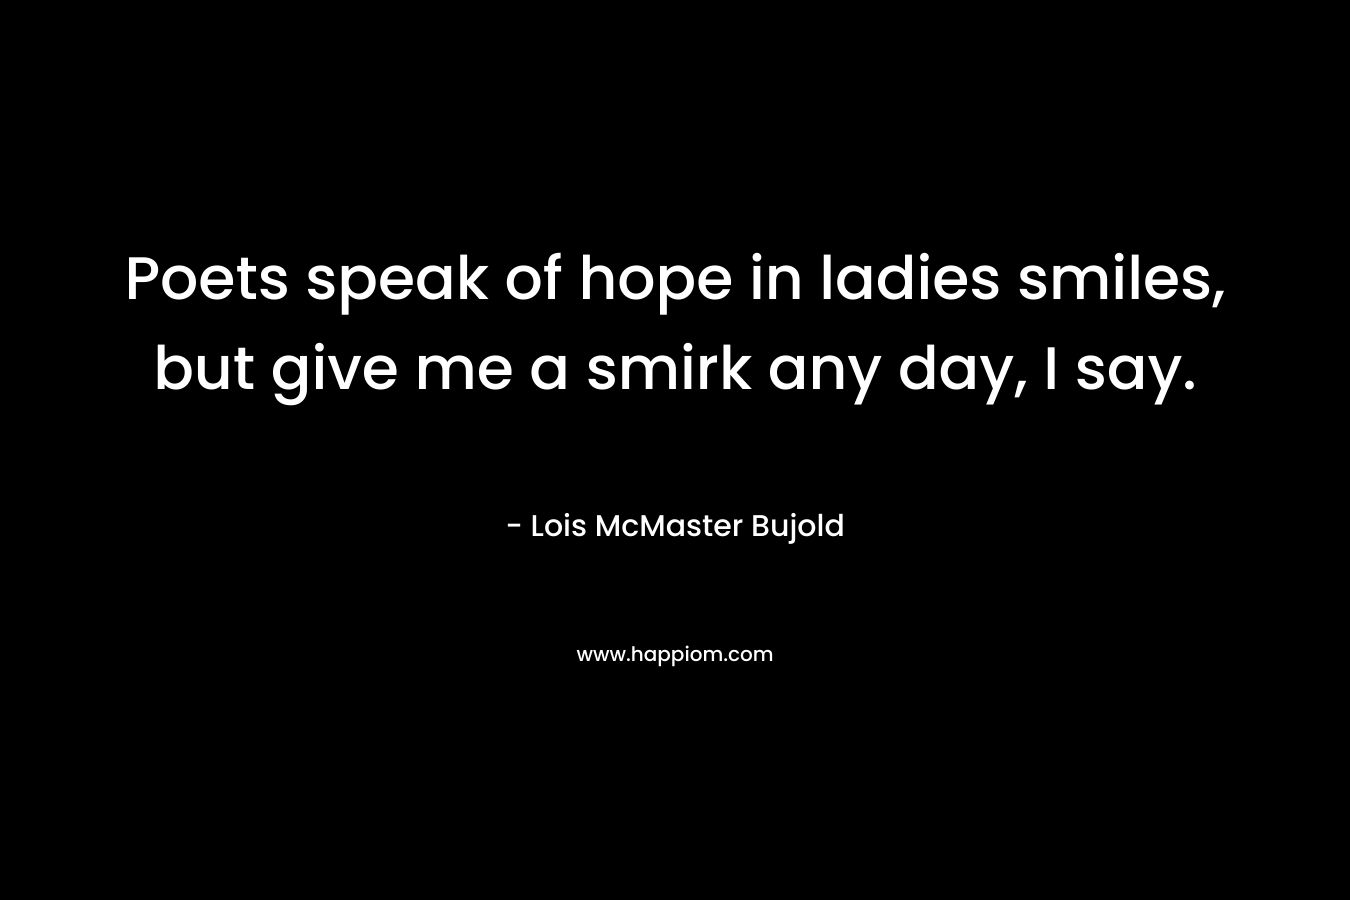 Poets speak of hope in ladies smiles, but give me a smirk any day, I say.